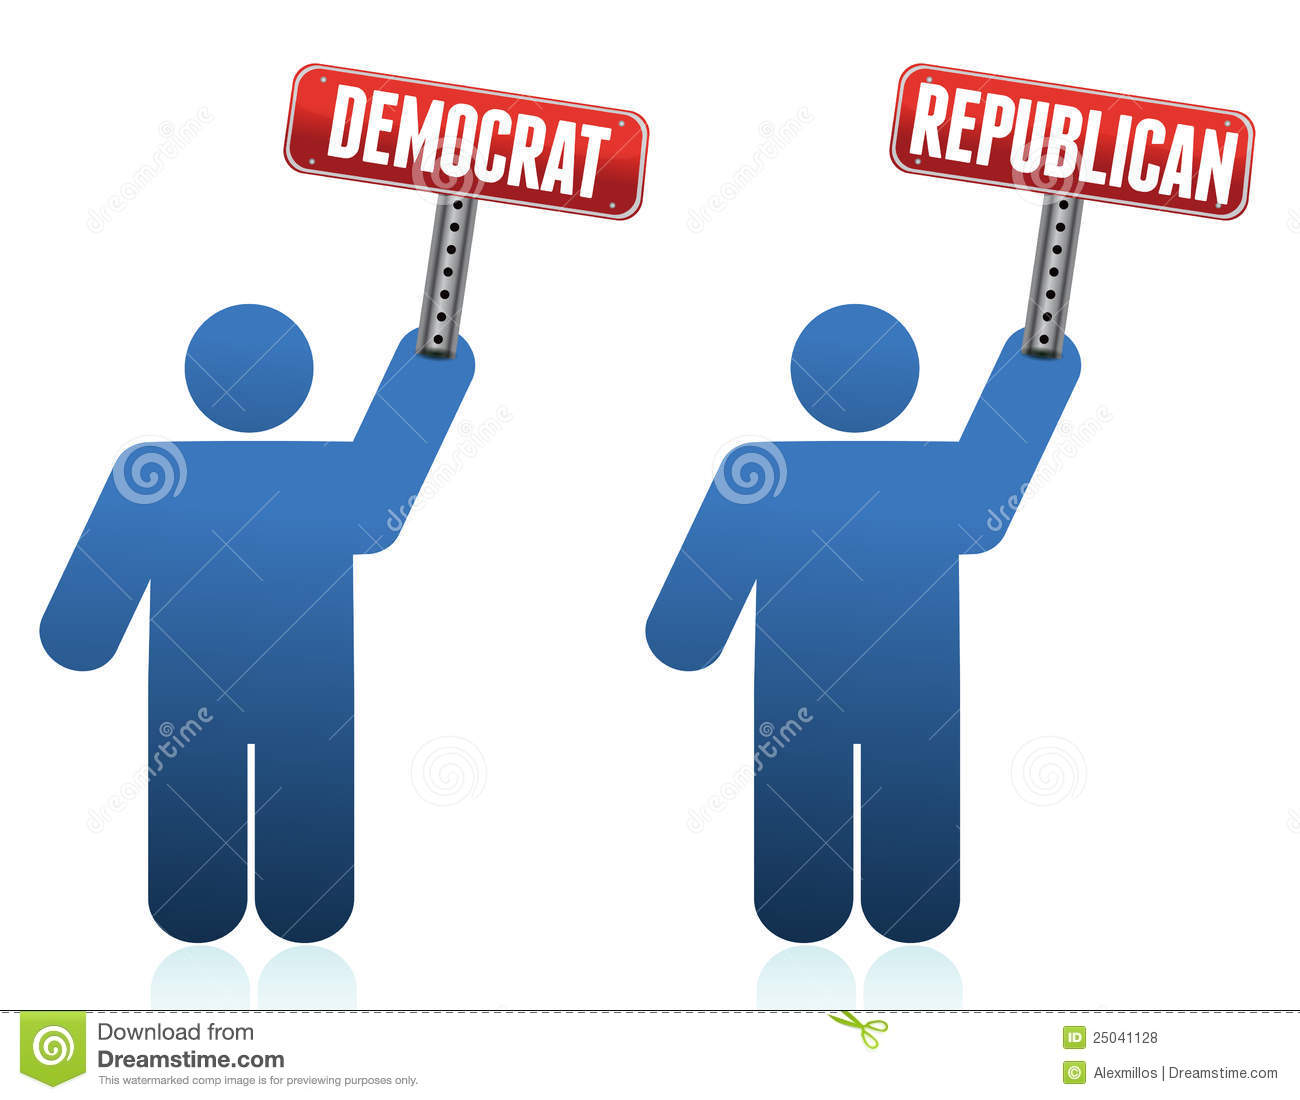 Democrat And Republican Icons Royalty Free Stock Photos   Image